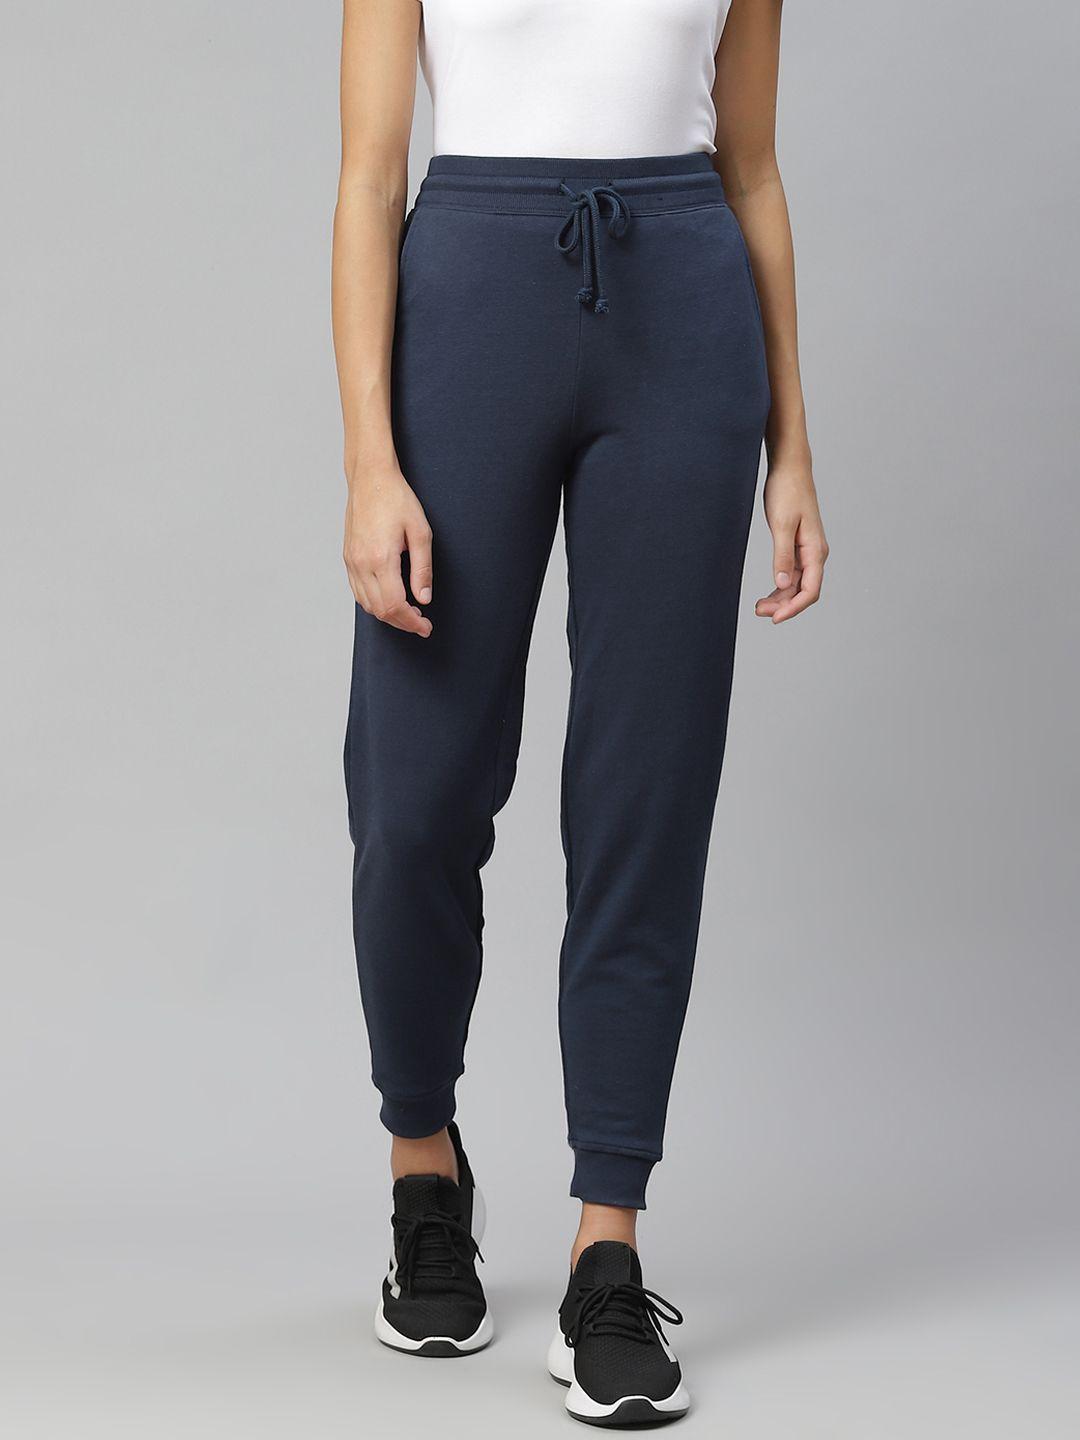 marks-&-spencer-women-navy-blue-solid-joggers